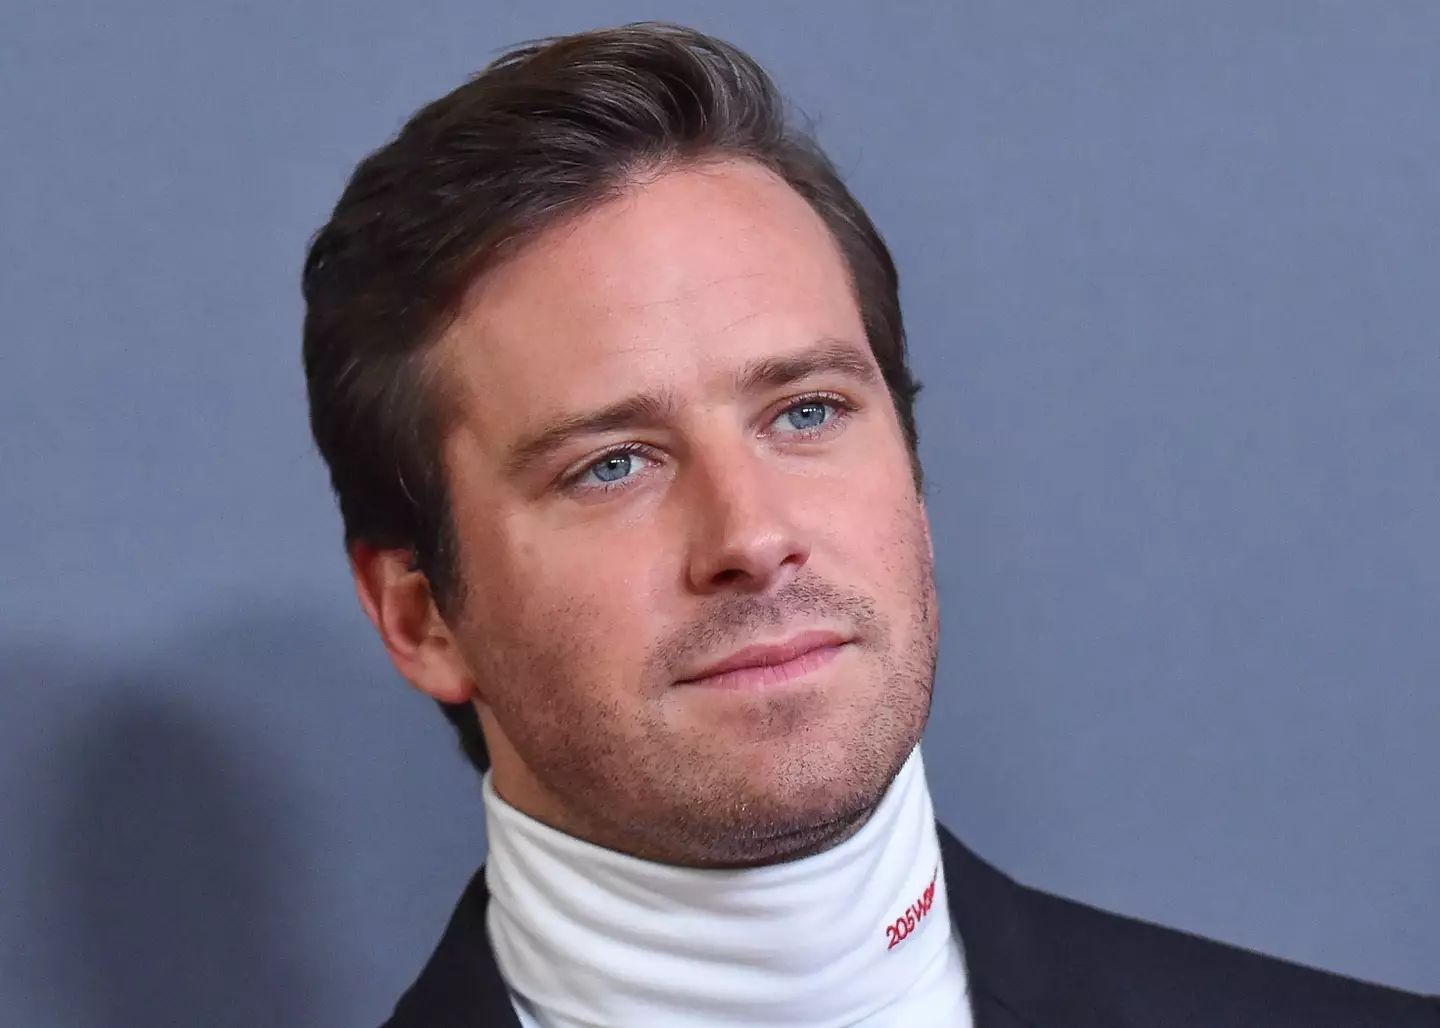 The Call Me By Your Name star is allegedly ‘totally broke’.